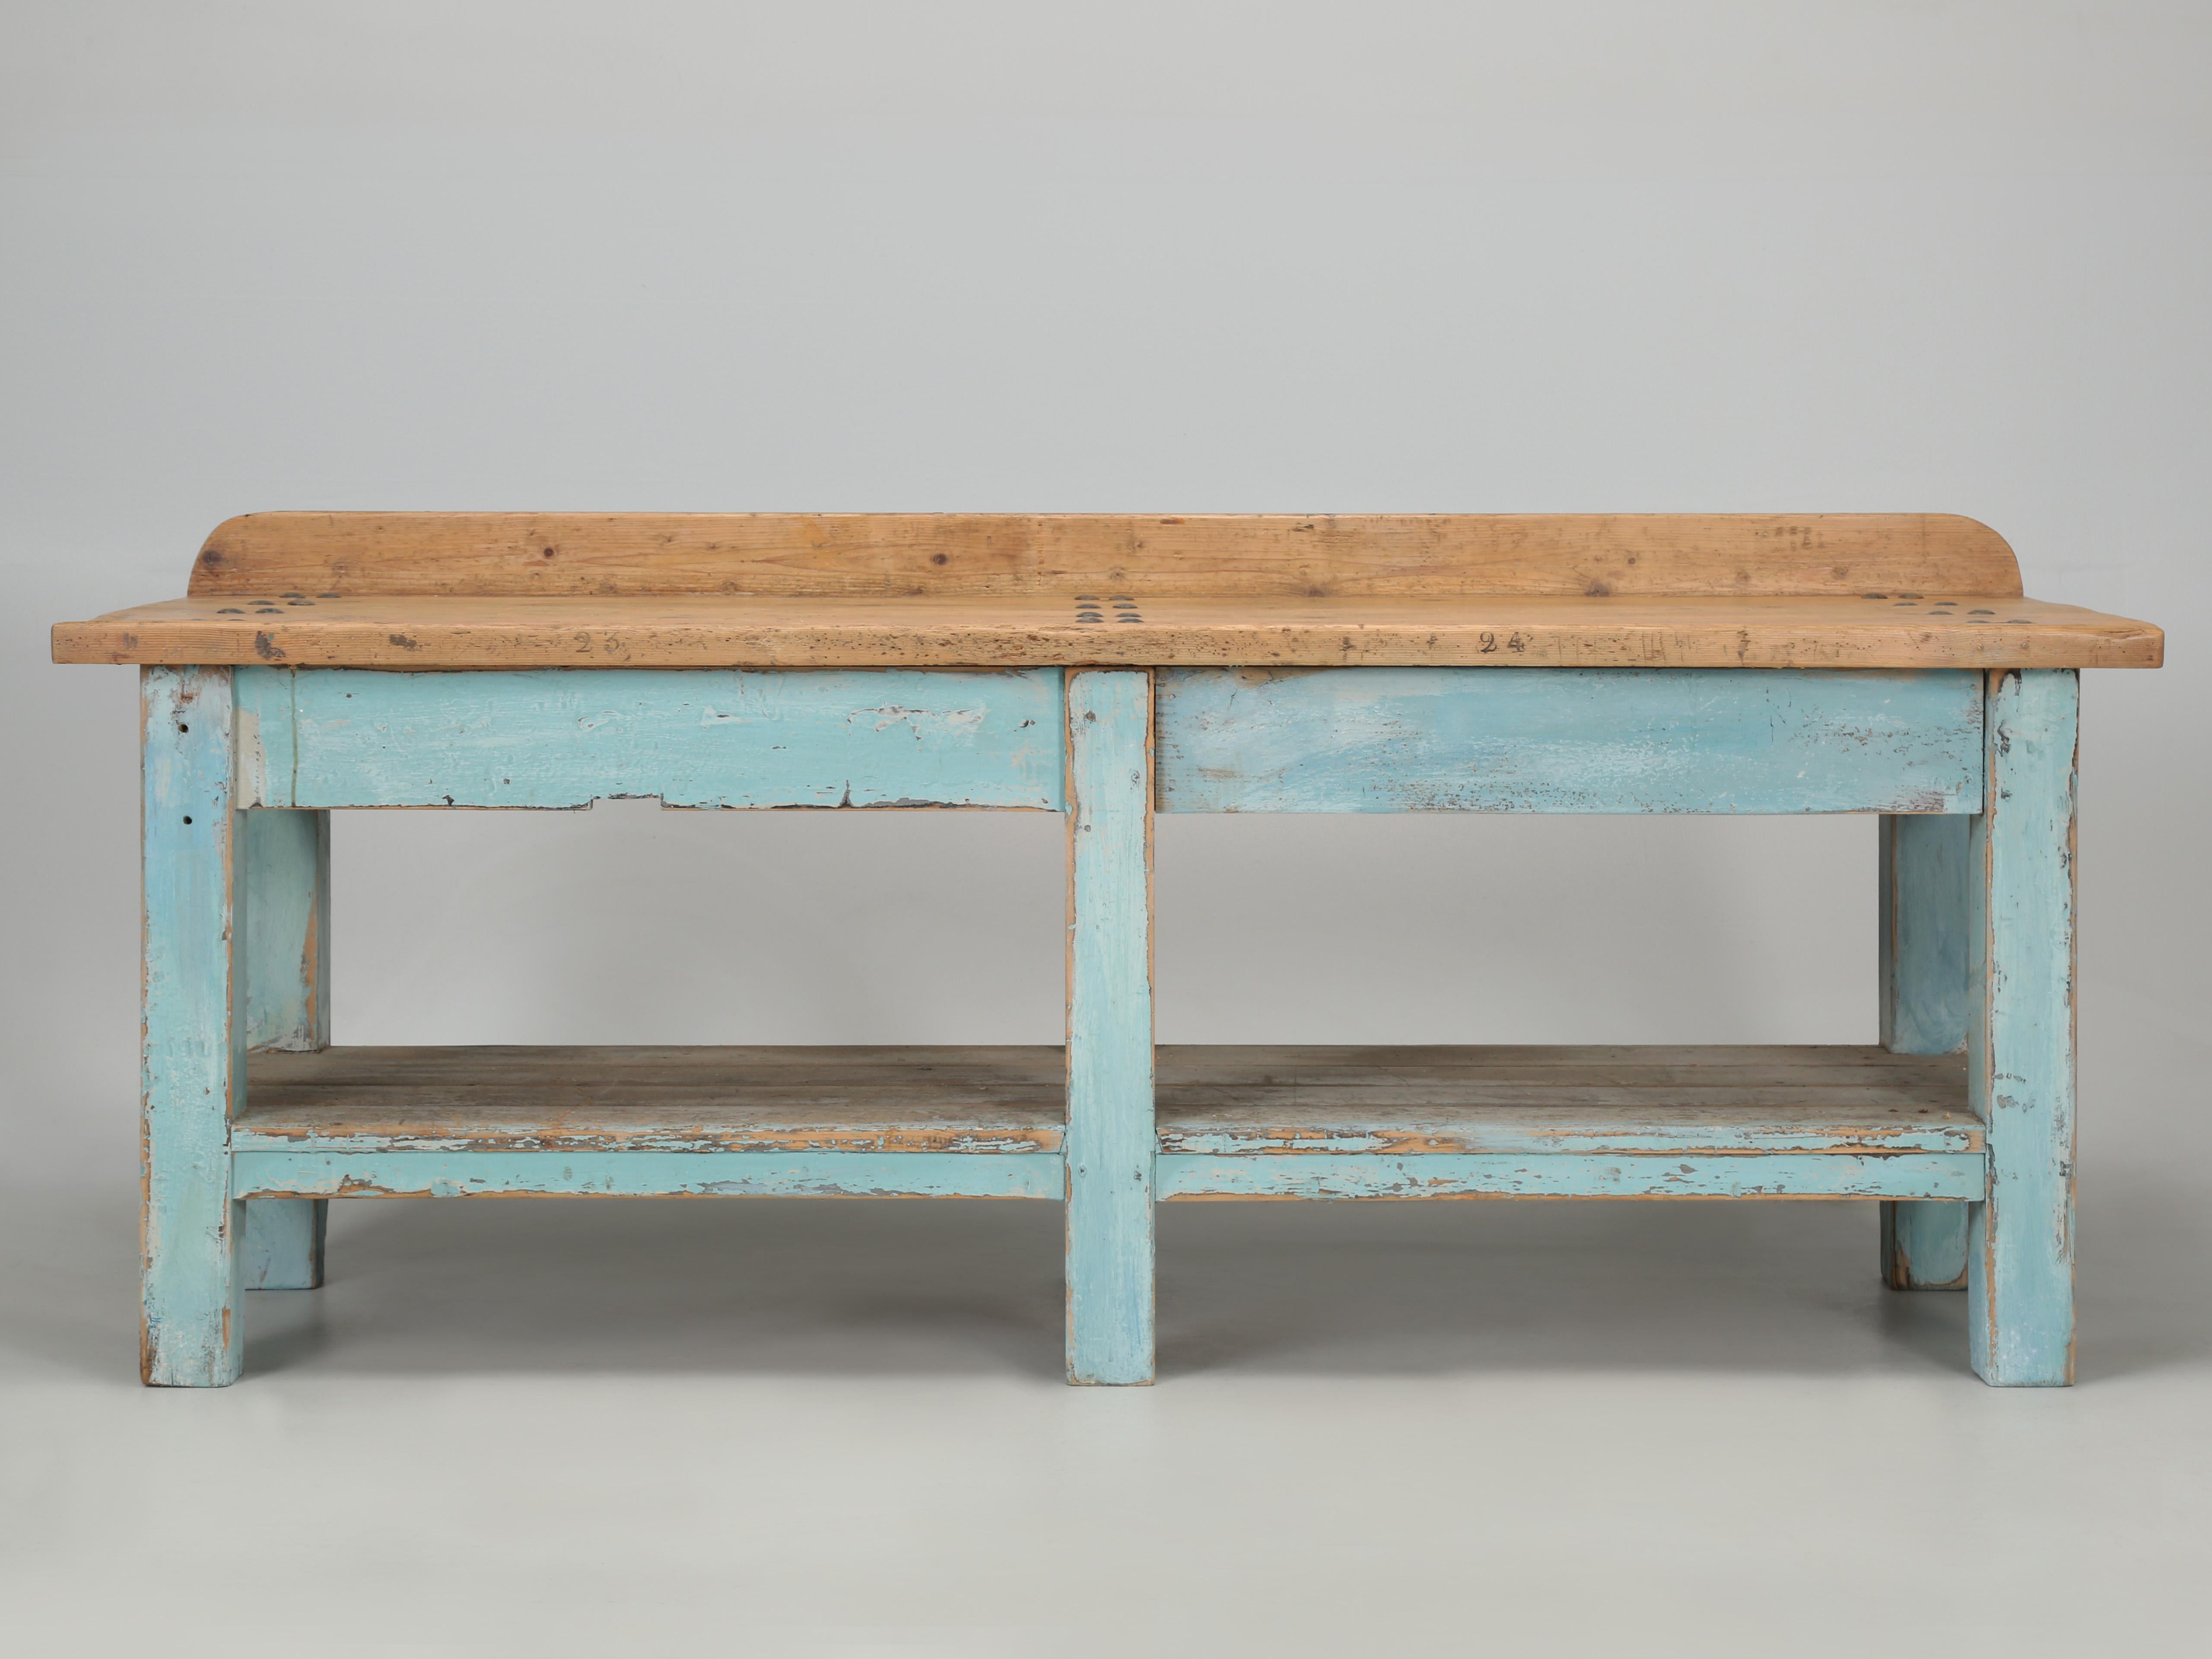 Antique Industrial work table, which could easily be repurposed for the center island in a country inspired kitchen. Our inhouse Old Plank restoration facility went through the work table to enhance the structural stability and did a thorough